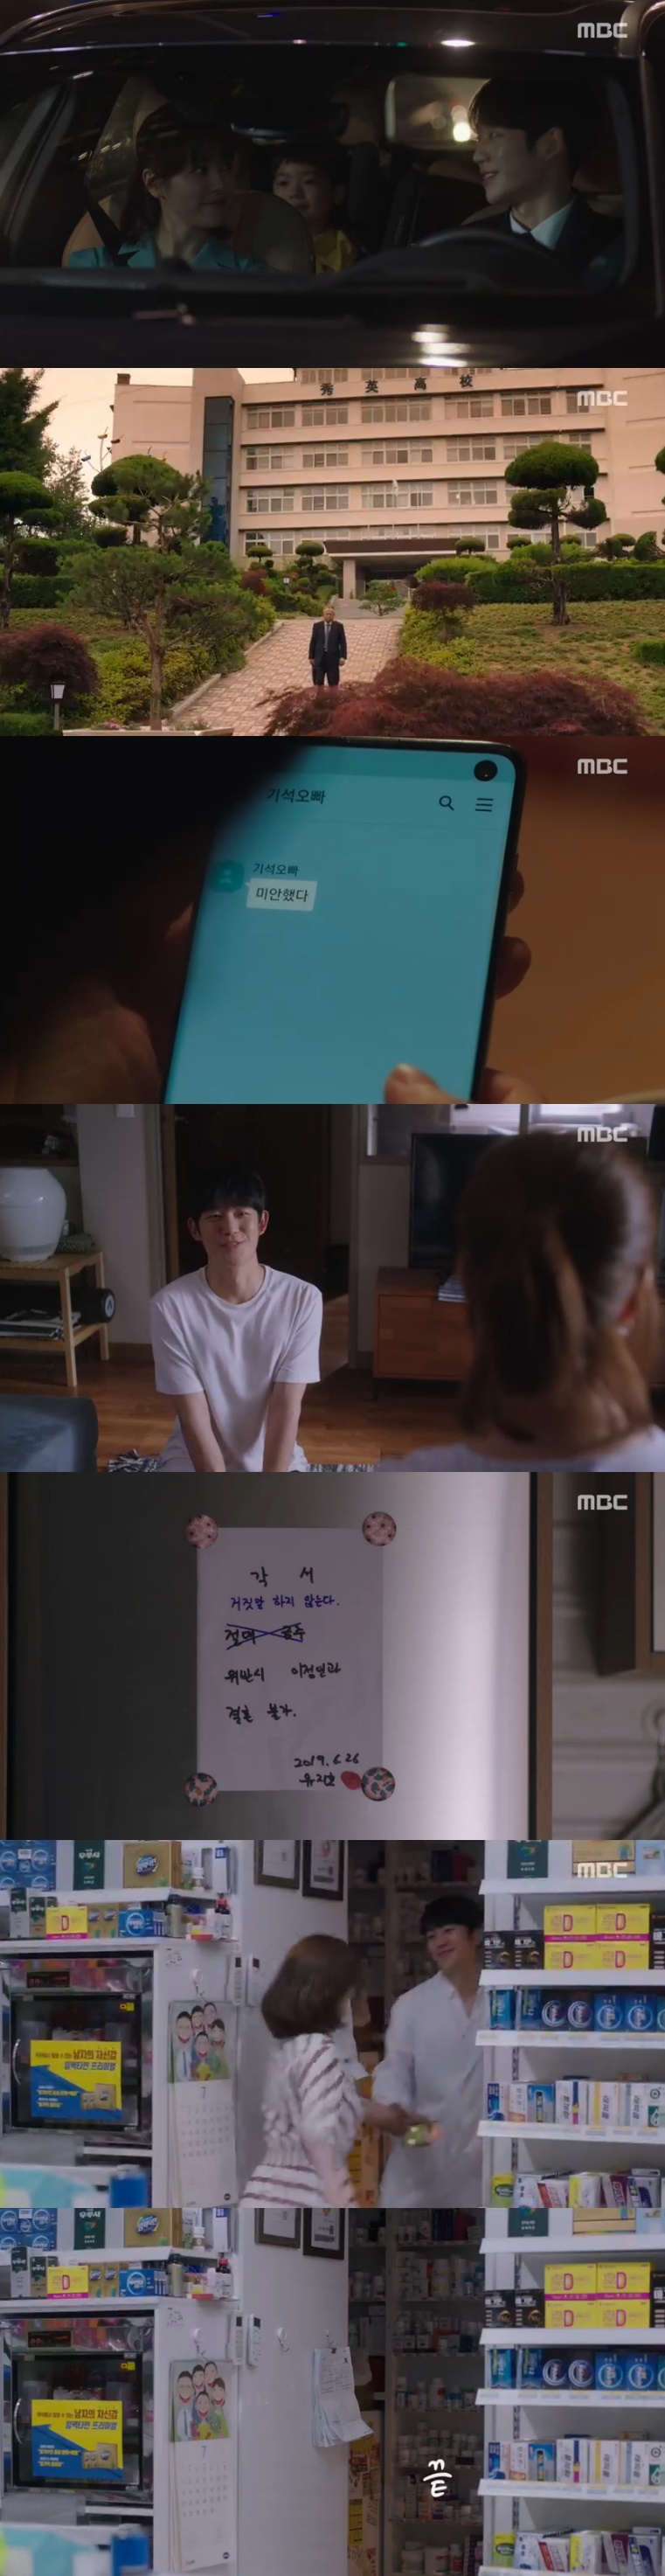 Spring Night Han Ji-min and Jung Hae-in welcomed Happy Ending.In the MBC drama Spring Night, which was broadcast on the afternoon of the 11th, Yoo JiHo (Jeong Hae-in) and Lee Jung-in (Han Ji-min) were depicted to share happy love.Yoo JiHo and Lee Jung-in sat in a pharmacy late at night and talked; Lee Chung-in said, Did you even think bad about Jung Eun-woo?Yoo JiHo said, You controlled me. Life. Action. Horse. Even thought. Ive been able to endure it.If you have never thought of it before, it is a lie. It will be hard to believe, but there is no emotion.Lee Choi Jung-in said, Good job, Jung Eun-woo, but Mr. JiHo himself would have wanted to comfort him.Thank you in Yoo JiHos Thank You, Choi Jung-in said, Thank you, I would have been sad, but I was comforted.Yoo JiHo, who went to Lee Jung-ins house, wrote a memorandum of abstinence in the words of Lee Choi Jung-in, Absolutely abstinence; I cannot marry Choi Jung-in in violation.Lee Tae-hak (Song Seung-hwan) said at a meal with Kwon Ki-seok (Kim Jun-ha) and Kwon Young-guk (Kim Chang-wan), Marriage should be decided by the party.Parents should support their childrens decisions. But Kwon Ki-seok pushed, Im going to get married this year. About autumn. After eating, Kwon Young-guk asked Lee Tae-hak, Do you think your daughter will marry? Lee Tae-hak avoided answering, Why do you do it after you finish the story?Kwon Yeong-guk sarcastically said, I cant believe your son or her daughter. I keep telling him to get married.Lee Tae-hak said, Model Behavior Choi Jung-in did not rush to do it.When Kwon Young-guk said, I have a conscience, Lee Tae-hak refuted, If the stone is shaken, it will not come out of dust. I will take a picture.Kwon Young-guk shouted, I want to try with me now. I swear my baby, but I can not go as I am. Lee Tae-hak also said, Lets take the class.Kwon Ki-seok took the drunken Lee Tae-hak home. Kwon Ki-seok told Shin Hyung-sun (Gil Hae-yeon): Choi Jung-in should not meet Yoo JiHo.I took a picture and came to the company and threatened me. My mom wants to see it, Lee Choi Jung-in told Yoo JiHo. Yoo JiHo, who suggested, Ill see Jung Eun-woo too.When Yoo Nam-soo (Oman-seok) and Ko Sook-hee (Kim Jung-young) worried, Yoo JiHo persuaded me that I have Jung Eun-woo to see all of me.Choi Hyun-soo (played by Lim Hyun-soo) spoke in front of the company elevator saying, Im getting married next to Yoo JiHo.Kwon Ki-seok heard this, and I learned that Shin Hyung-sun and Yoo JiHo had a meal place.Before having a meal, Choi Jung-in, who went to the Seo-yool Lee (Lim Sung-eon), heard from Lee Jae-in (Lee Min-kyung) that Nam Si-hoon (Lee Mu-saeng) hit the Seo-yool Lee.Lee Jung-in comforted the Seo-yool Lee in tears.Six people at a Korean restaurant had dinner together, including Yoo JiHo, Choi Jung-in, Shin Hyung-sun, Seo-in, Lee Jae-in and Yoo Jung Eun-wooI came here because I wanted to learn, said Seo-yool Lee, who will become a single mother. Yoo JiHo showed humility, My parents have raised it all.The Sea-yool Leein then asked, I want to ask you one thing: what kind of heart you endured.Yoo JiHo said, My parents raised them all, but Jung Eun-woo is my child. I only looked at one thing.Choi Jung-in looked at me only, but I have to protect it no matter what. The new line and Choi Jung-in wiped away tears.Im impressed, Im a parent, said Shin. Seo-young Lee also gave a warm atmosphere by saying thank you.Choi Jung-in advises that Father has a long way to go, said Choi Jung-in, I will get through it. I will wait as long as I can.I will have something I will regret, something I will not think about in the future. And I am okay with Mr. JiHo.They held hands and showed a strong love.In the car that came back from the meal, Yoo Eun-woo asked, Are you married to Mr. Father? Is he my mother?Youre going to be a Jung Eun-woo mother, replied Lee Jung-in, who said, Ill do well.Lee Choi Jung-in smiled, saying, No, we will do well.The next day, Kwon Yeong-guk offered Lee a board position. Lee Tae-hak delayed the reply, saying, I should think about it.Lee called Lee Jung-in and asked, Are you a quack and not really?I know youre going to be more snowy than living in a brilliant way, Ill show you how you live happily. Believe me, Lee said.Lee refused to move to the board of directors in response to Choi Jung-in, who told Kwon Ki-seok, Gi Seok did enough for you.Kwon sent an apology to Lee Chung-in, saying, Im sorry. Kwon looked at the line and went out looking for a new relationship.Yoo JiHo lied to Choi Jung-in about sleeping and drank with Choi Hyun-soo Park Young-jae (Lee Chang-hoon) all night watching soccer.The next morning, Choi Jung-in came to Yoo JiHos house and was angry at the sight, because he broke the memorandum this week.But soon this Choi Jung-in was angry at the charm of Yoo JiHos boat hurts.Yi Jung-in found Yoo JiHos home; Yu Nam-soo and Yoo JiHo were brought closer by drinking.Lee Choi Jung-in told Yoo Nam-soo and Ko Sook-hee, I know youre worried. I wish you were less. Ill be pretty with each other.I will do my best as much as I can to Jung Eun-woo The next morning, Yi Jung-in took place at the Yoo JiHo home; Yoo JiHo had Yi Jung-in write a memorandum of abstinence.Lee Jung-in turned away, saying the stomach hurts and the two laughed together; Yoo JiHos ban on lying was changed to a memorandum of no lies.Yoo JiHo sent a message to Lee Choi Jung-in saying, Thank you for coming to me.Lee Choi Jung-in replied: One spring brought Mr JiHo.One rainy day, Choi Jung-in stopped by the pharmacy and told Yoo JiHo, Give me some medicine to break the pharmacists drink. Yoo JiHo said, Ill give you some medicine.I do not care about the woman who brought my wallet. The two of them made love while kissing at the pharmacy.On the other hand, Spring Night is a romance drama about the process of loving two people who accidentally encountered each other in a pharmacy in spring.Photo  MBC Broadcasting Screen